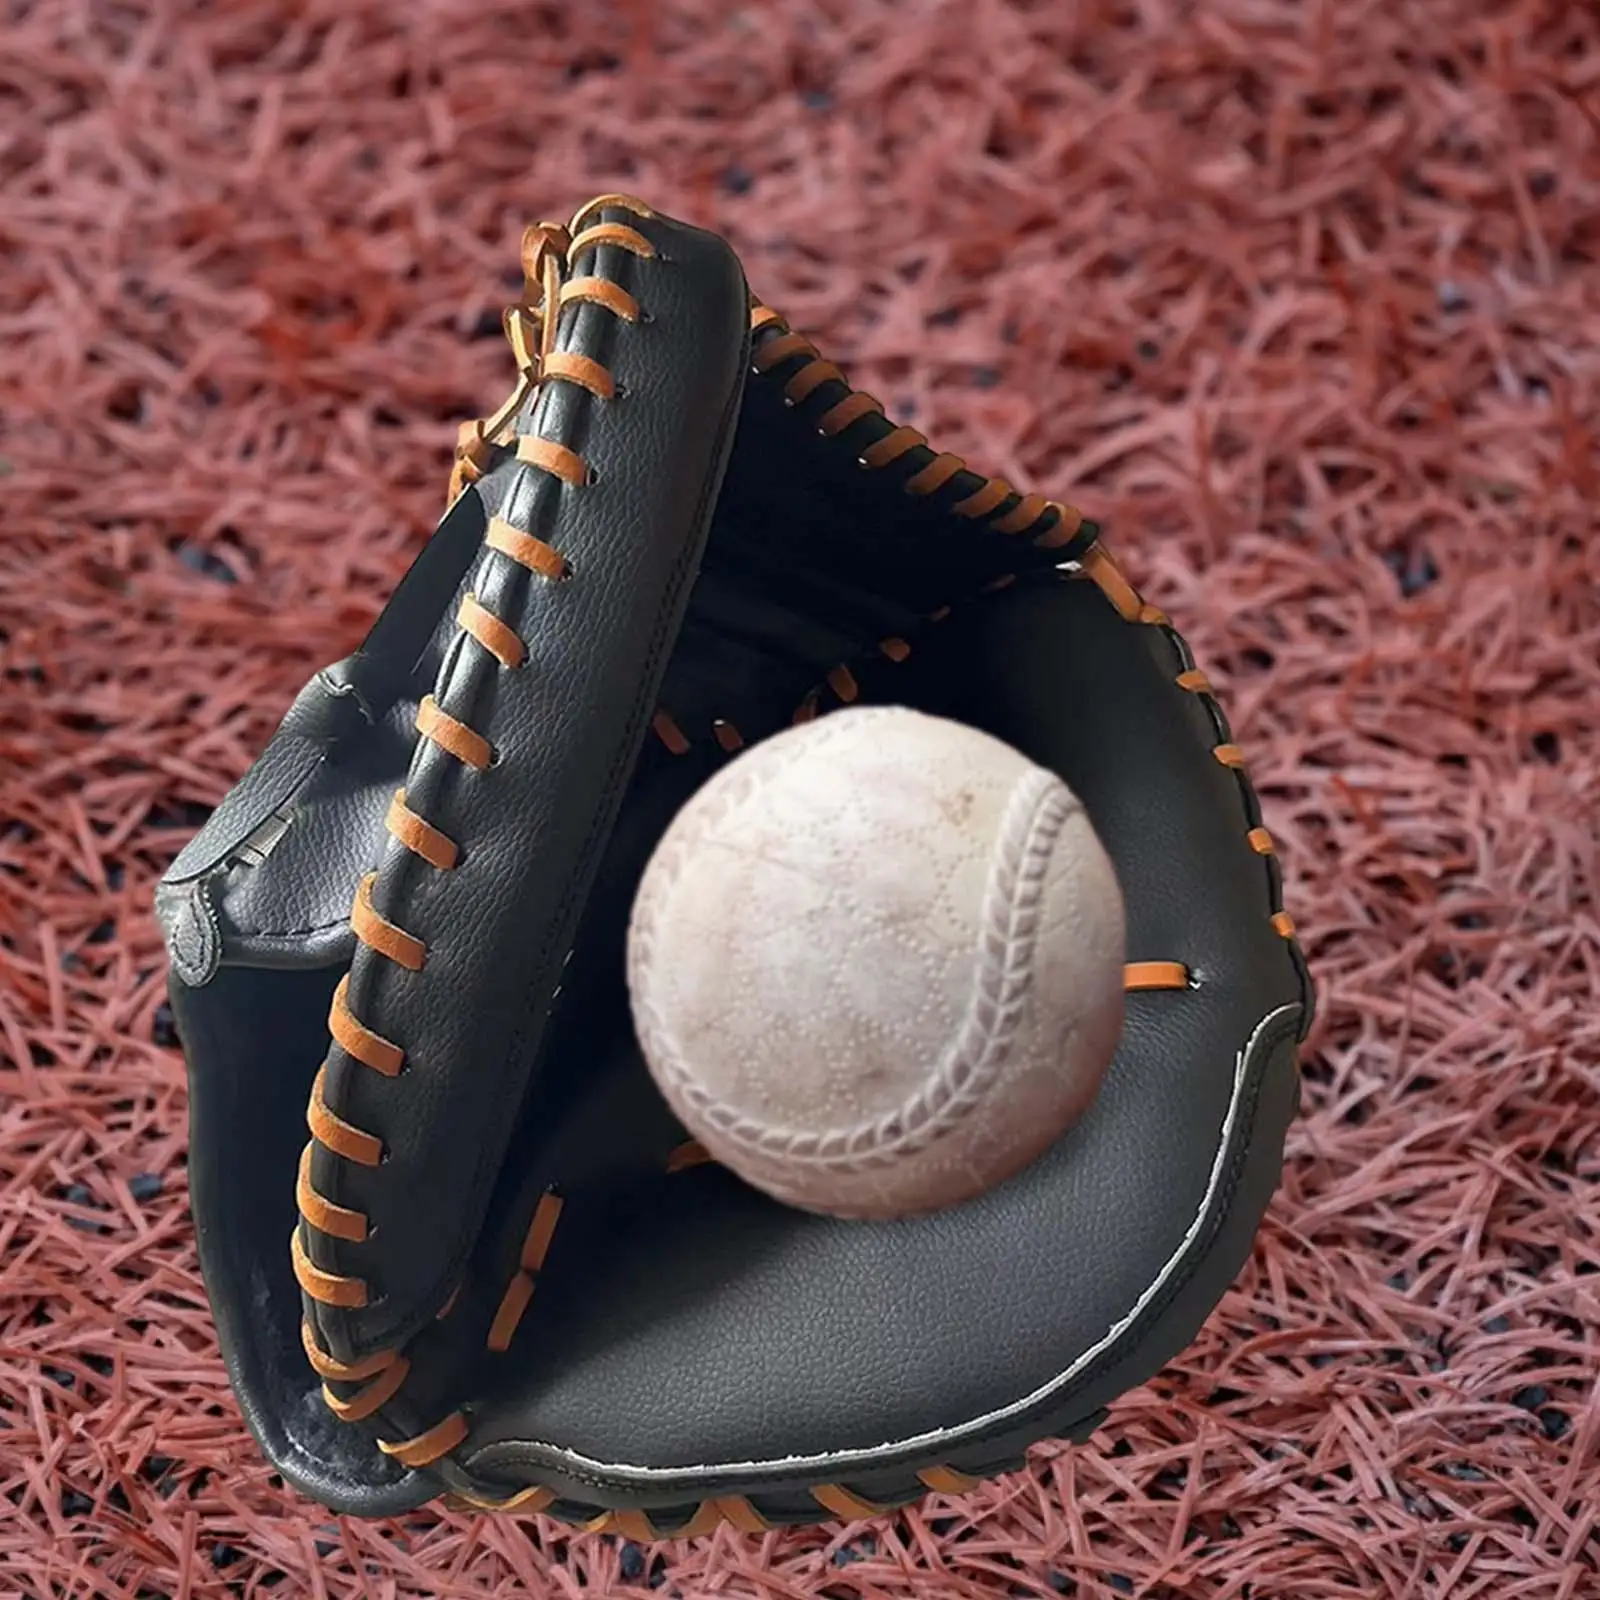 Thickened Baseball Glove Softball Mitt Flexibility Outfield Gloves Left Handed Comfortable PU Catcher Mitts for Training Match